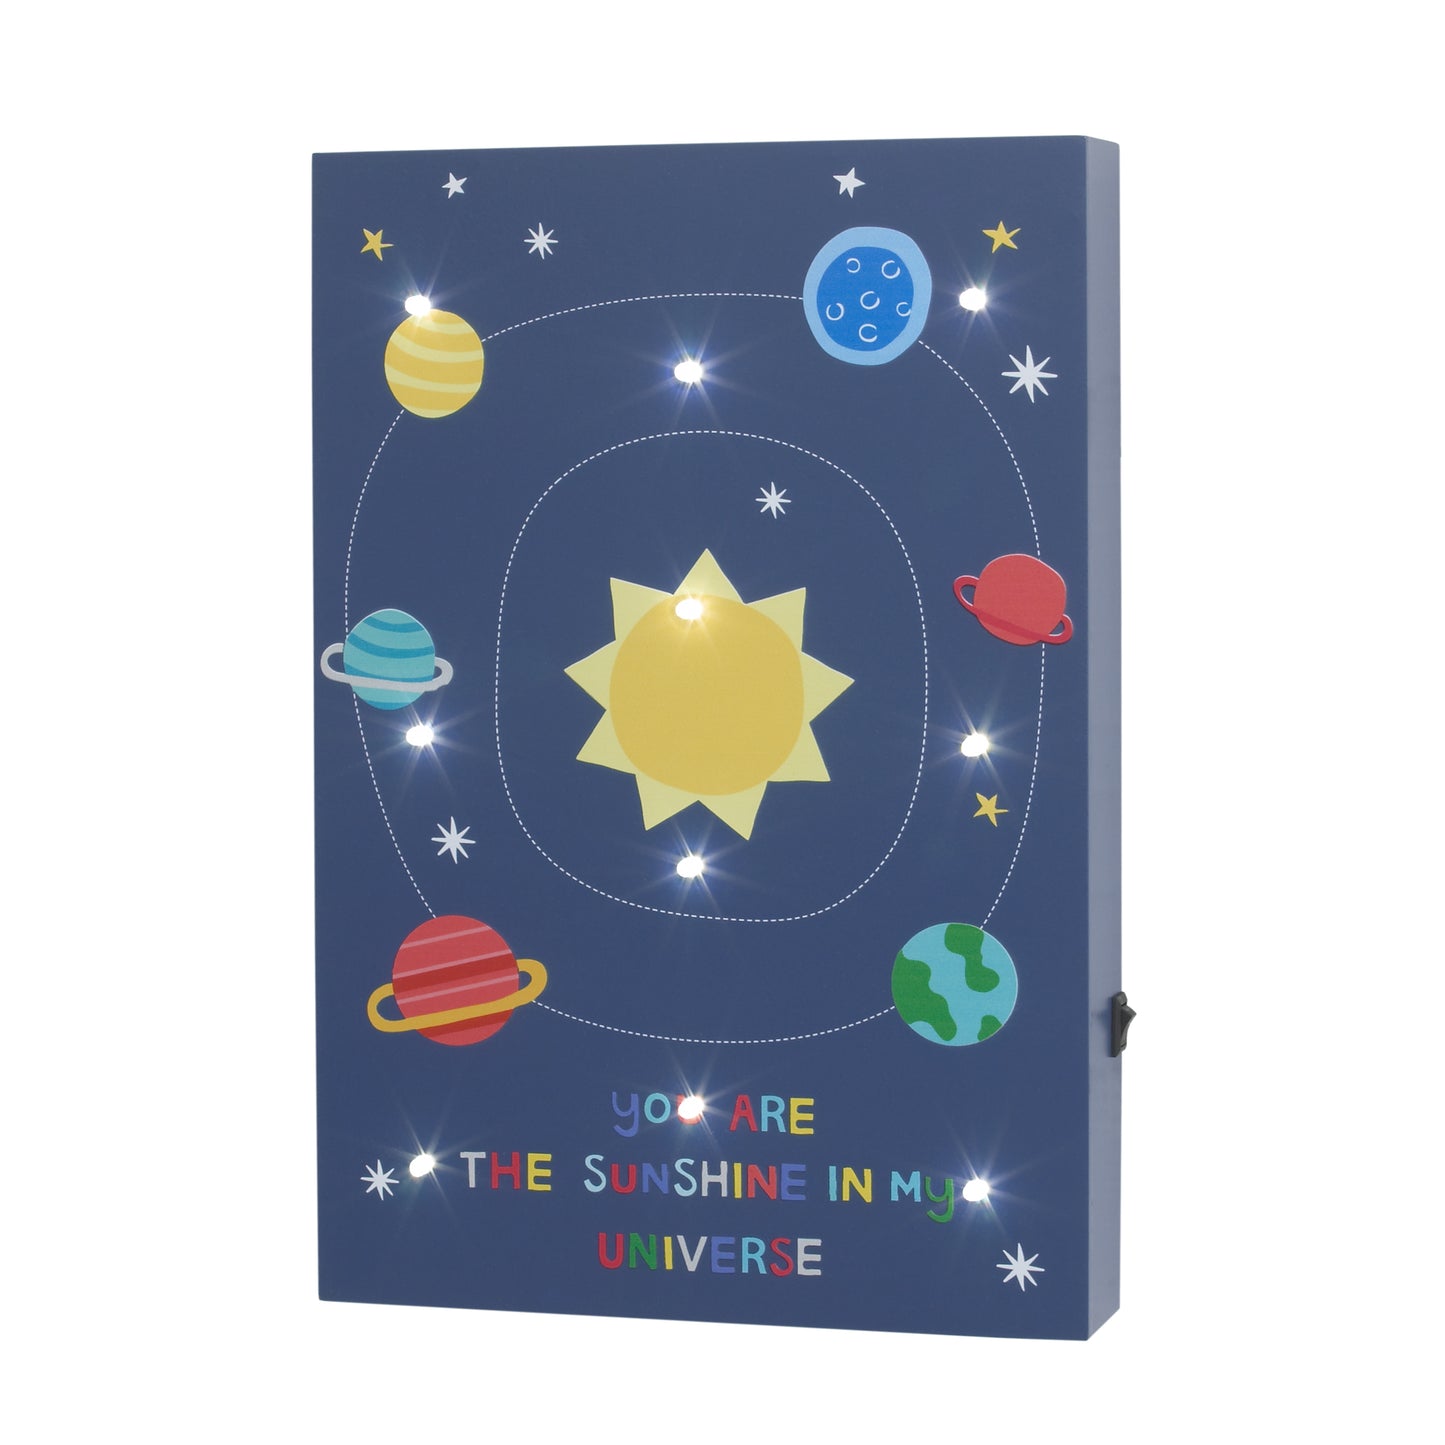 Little Love by NoJo Navy, Orange, Yellow, Blue Solar System "You are the Sunshine in my Universe" Lighted Wall Décor